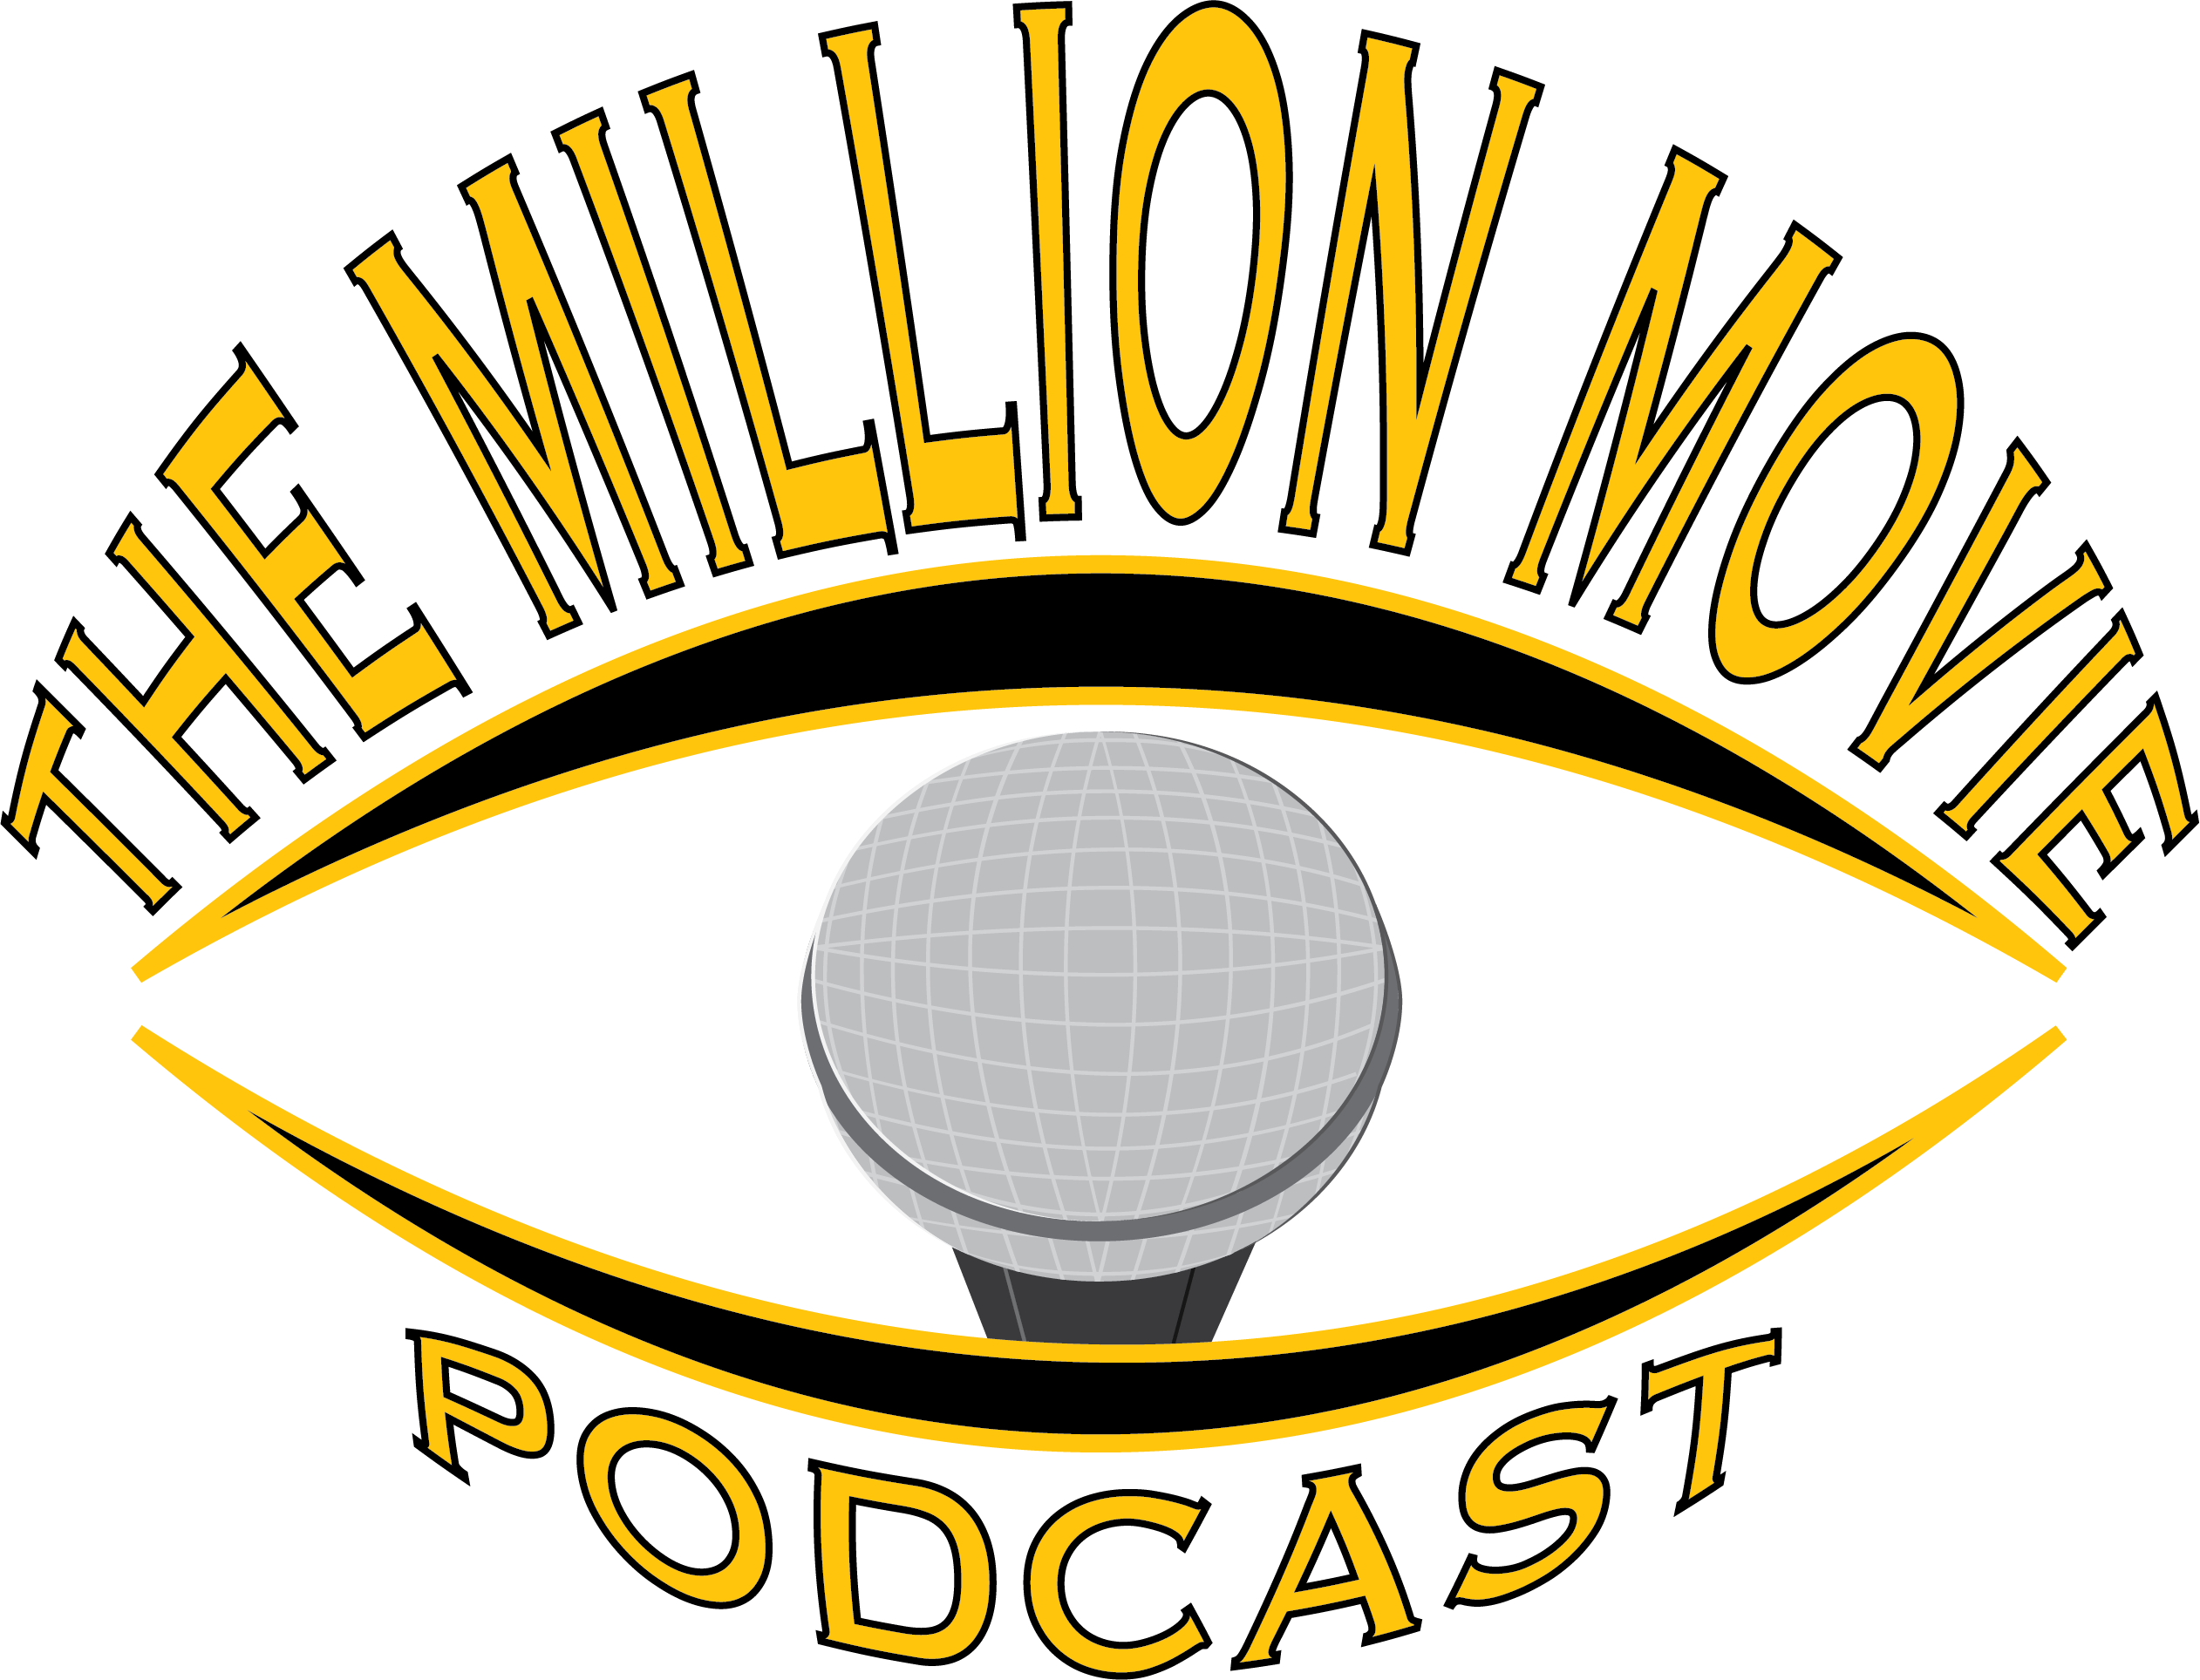 The Million Movie Podcast: Behind the Scenes